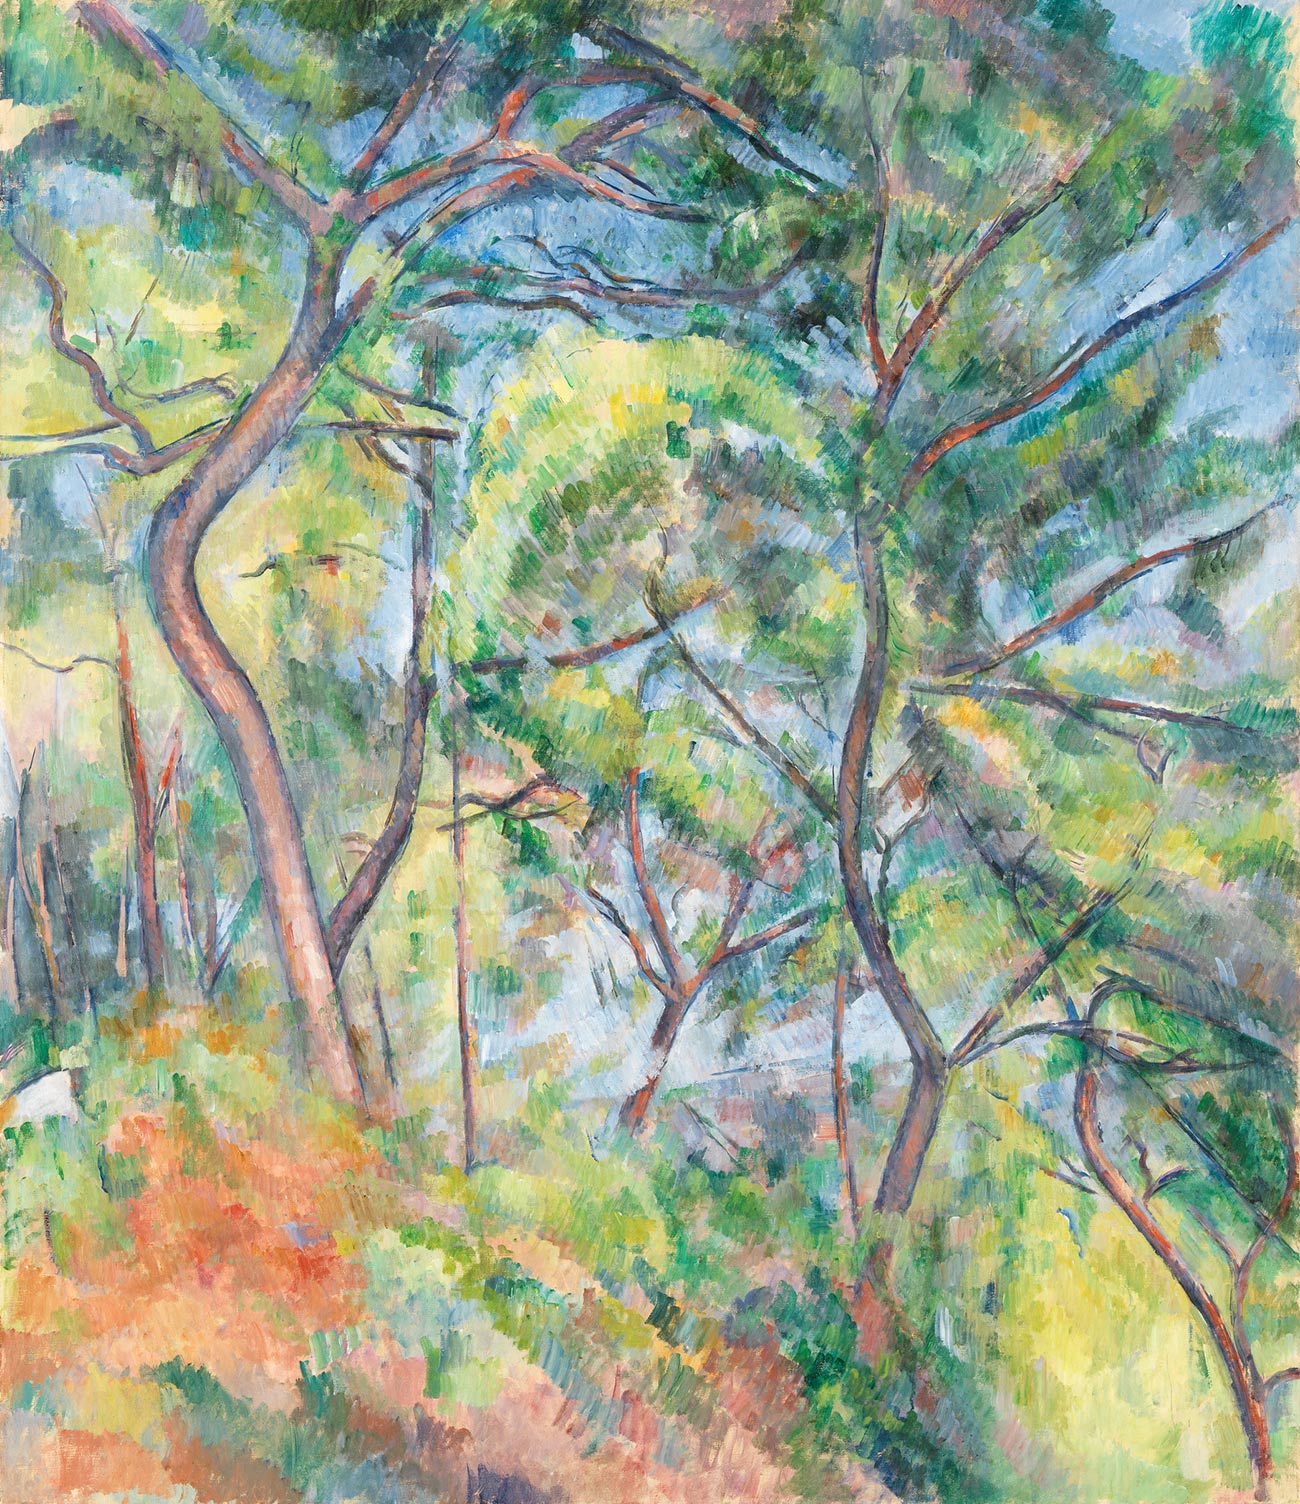 Abstract painting of tree trunks and green and red foliage fills the image.